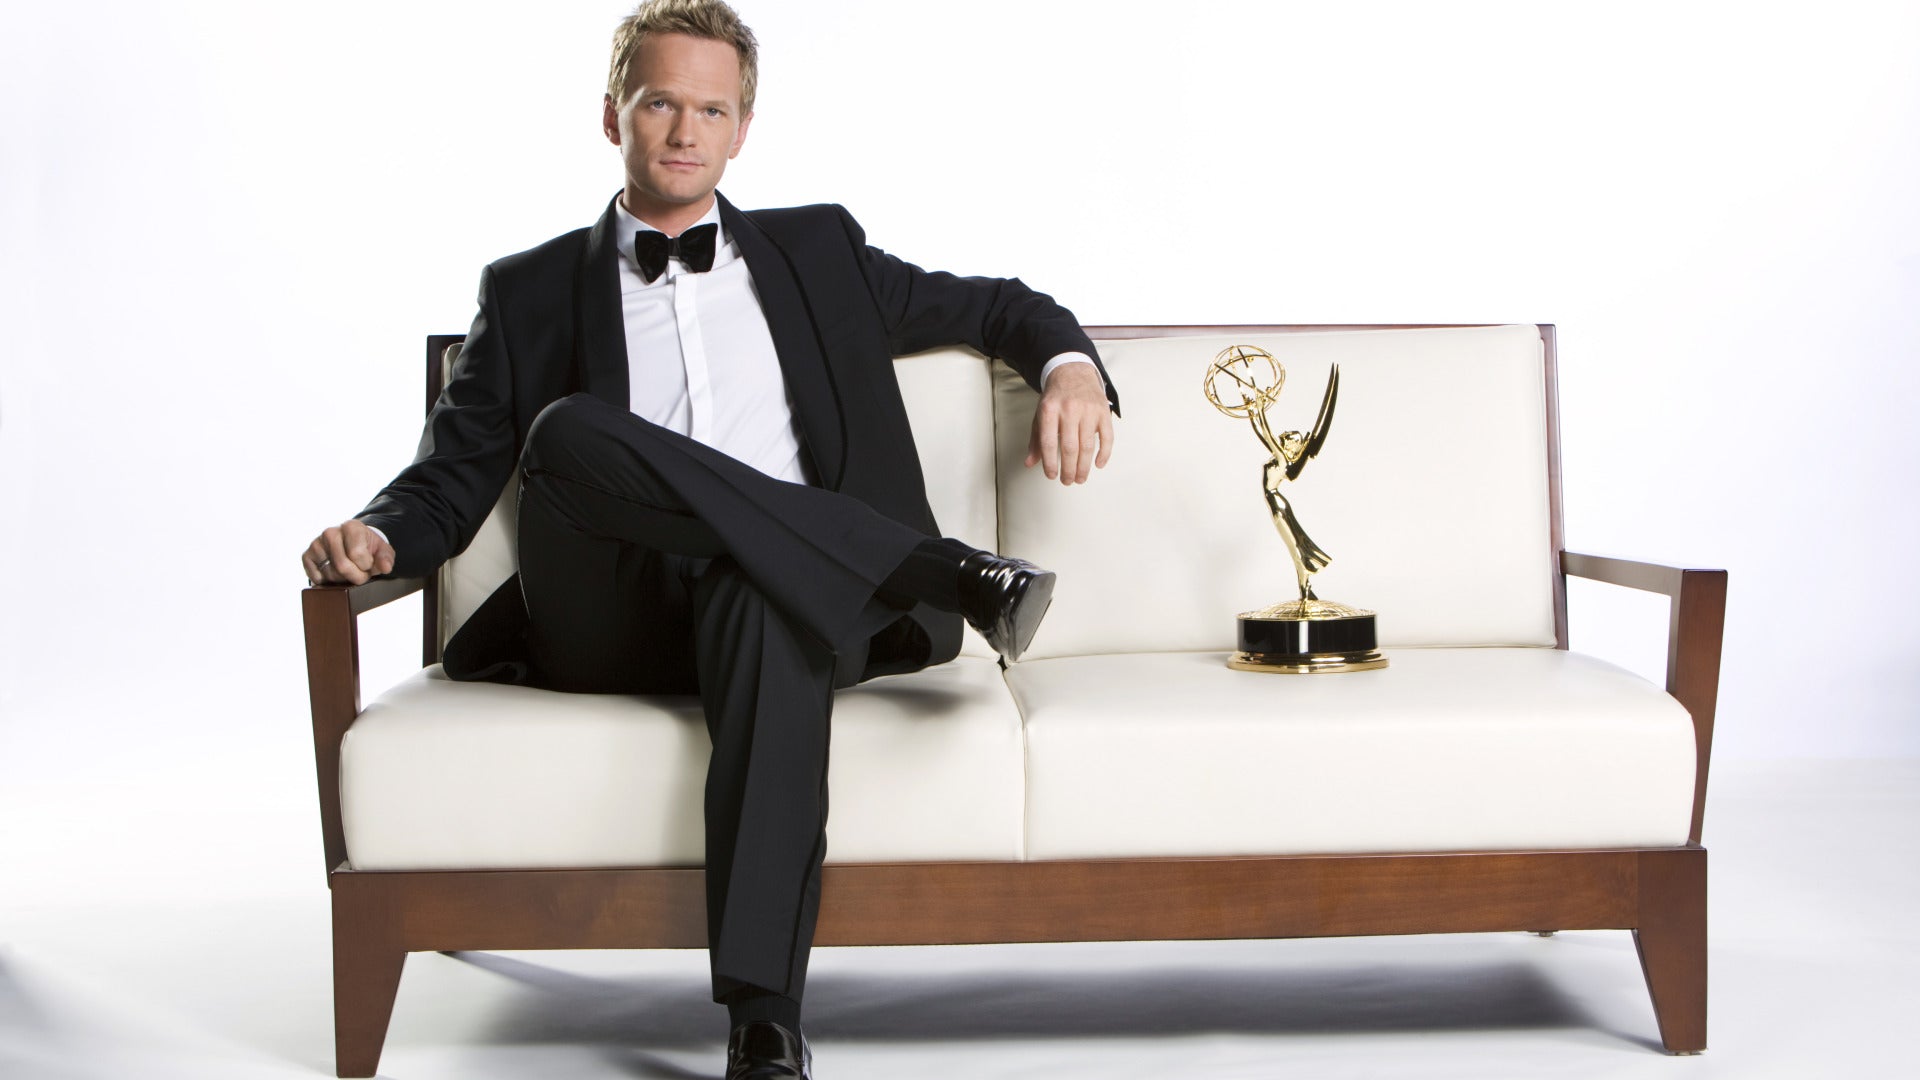 Neil Patrick Harris wearing a formal attire and sitting on a white couch.